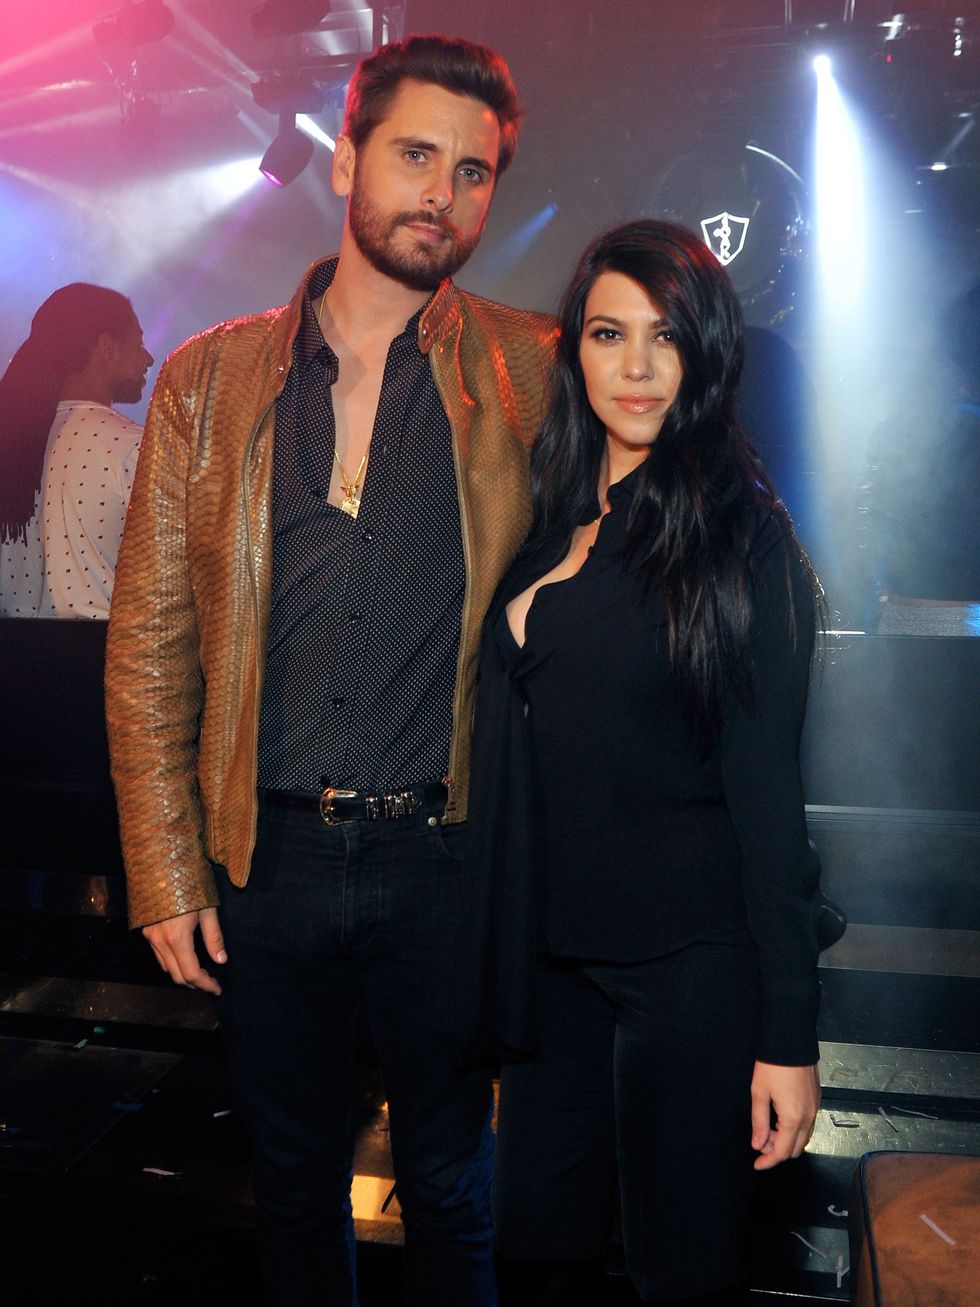 LAS VEGAS, NV - FEBRUARY 21:  Television personalities Scott Disick (L) and Kourtney Kardashian appear at 1 OAK Nightclub at The Mirage Hotel &amp; Casino on February 21, 2015 in Las Vegas, Nevada.  (Photo by David Becker/WireImage)